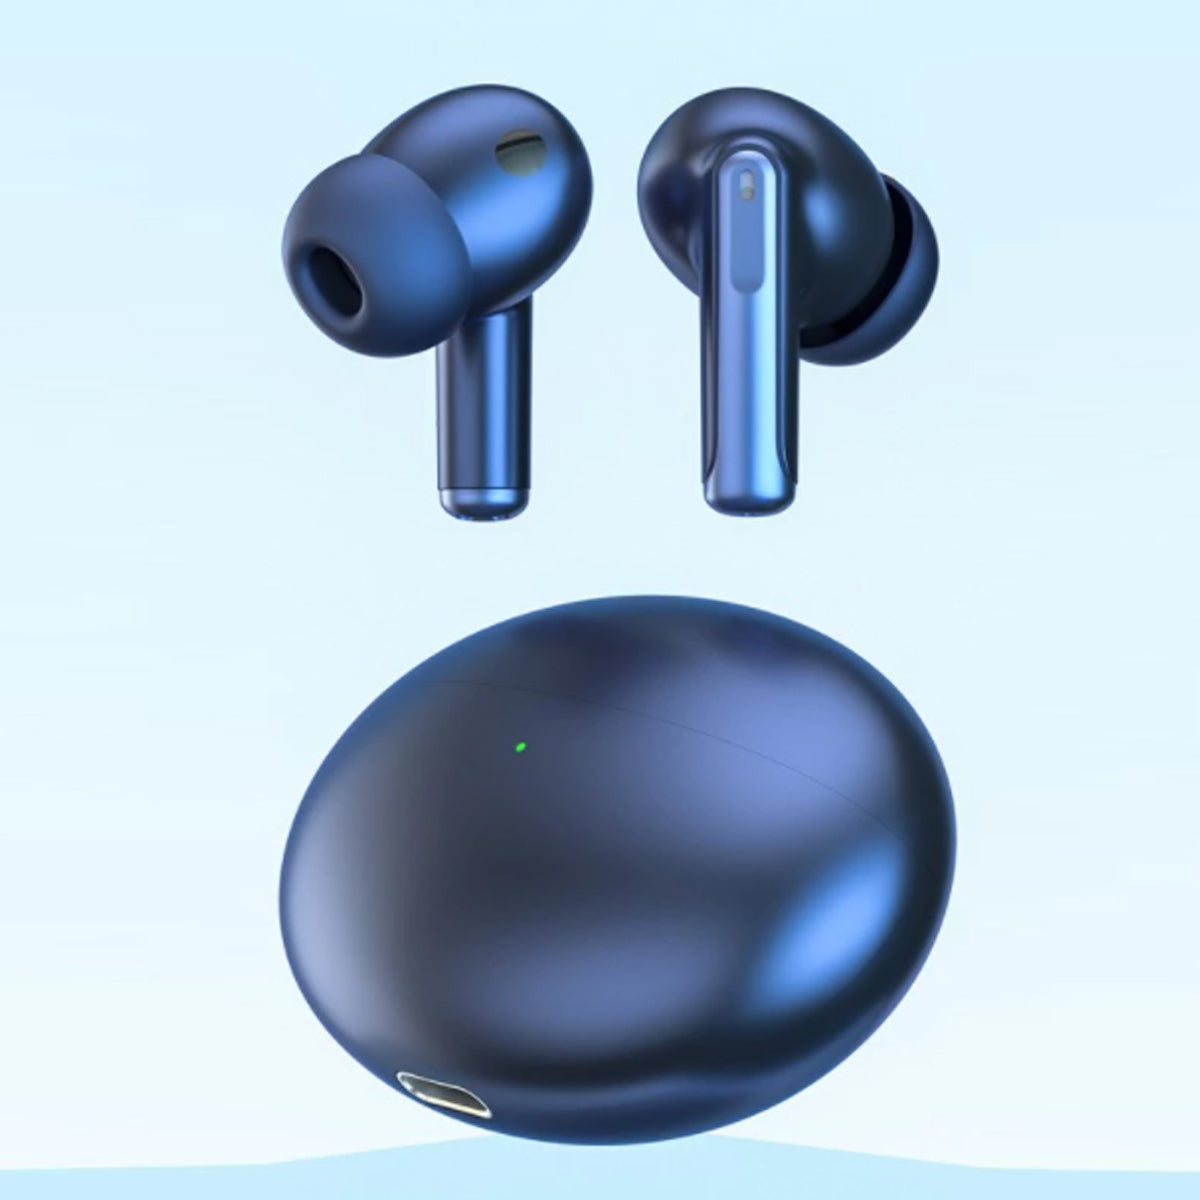 ClarityPLUS Earbuds With Super Clear Sound And Wireless Charging by VistaShops